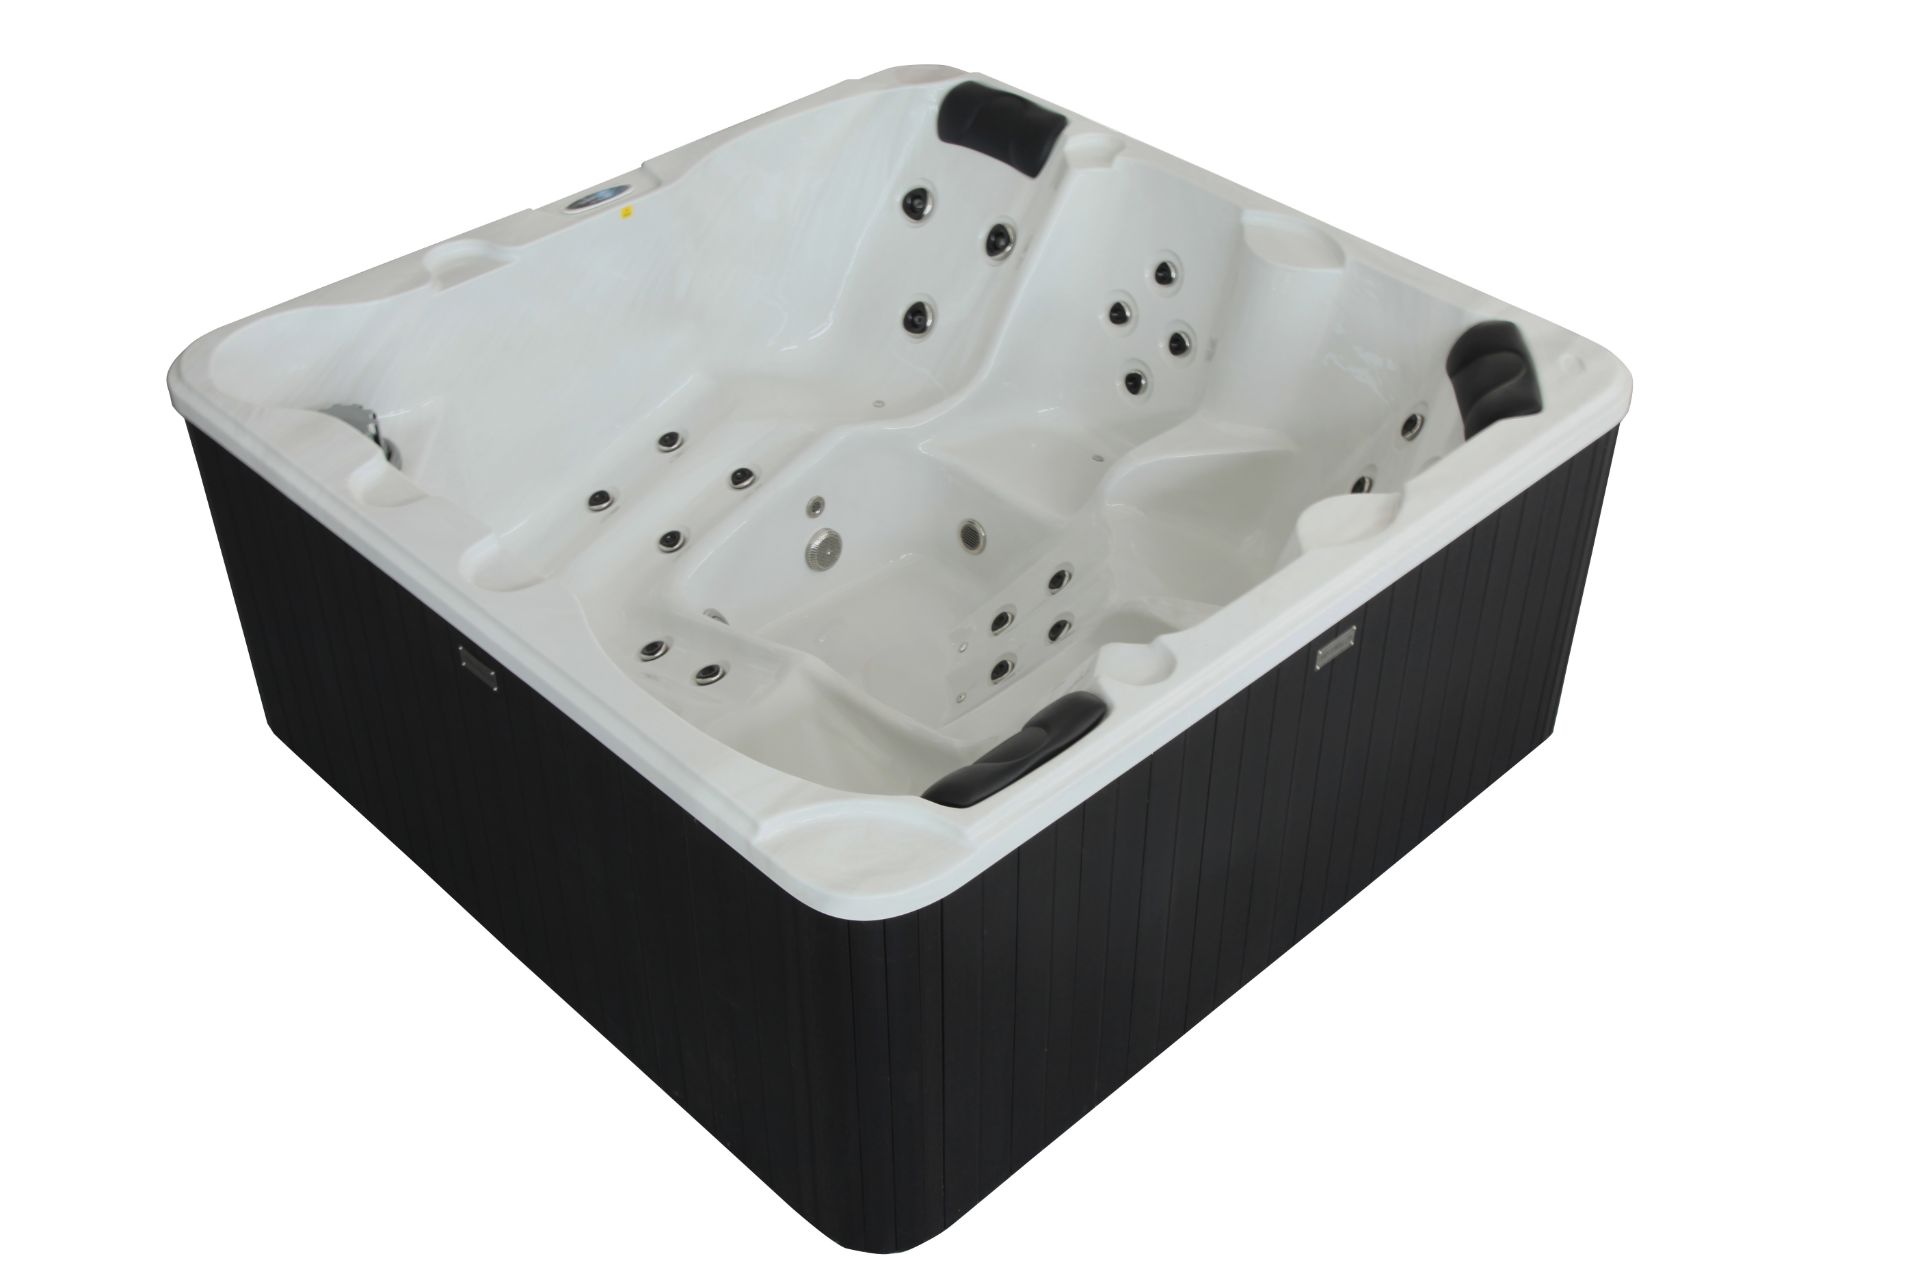 HIGH QUALITY NEW PACKAGED 2015 HOT TUB, MATCHING STEPS, SIDE, INSULATING COVER, TOP USA RUNNING GEAR